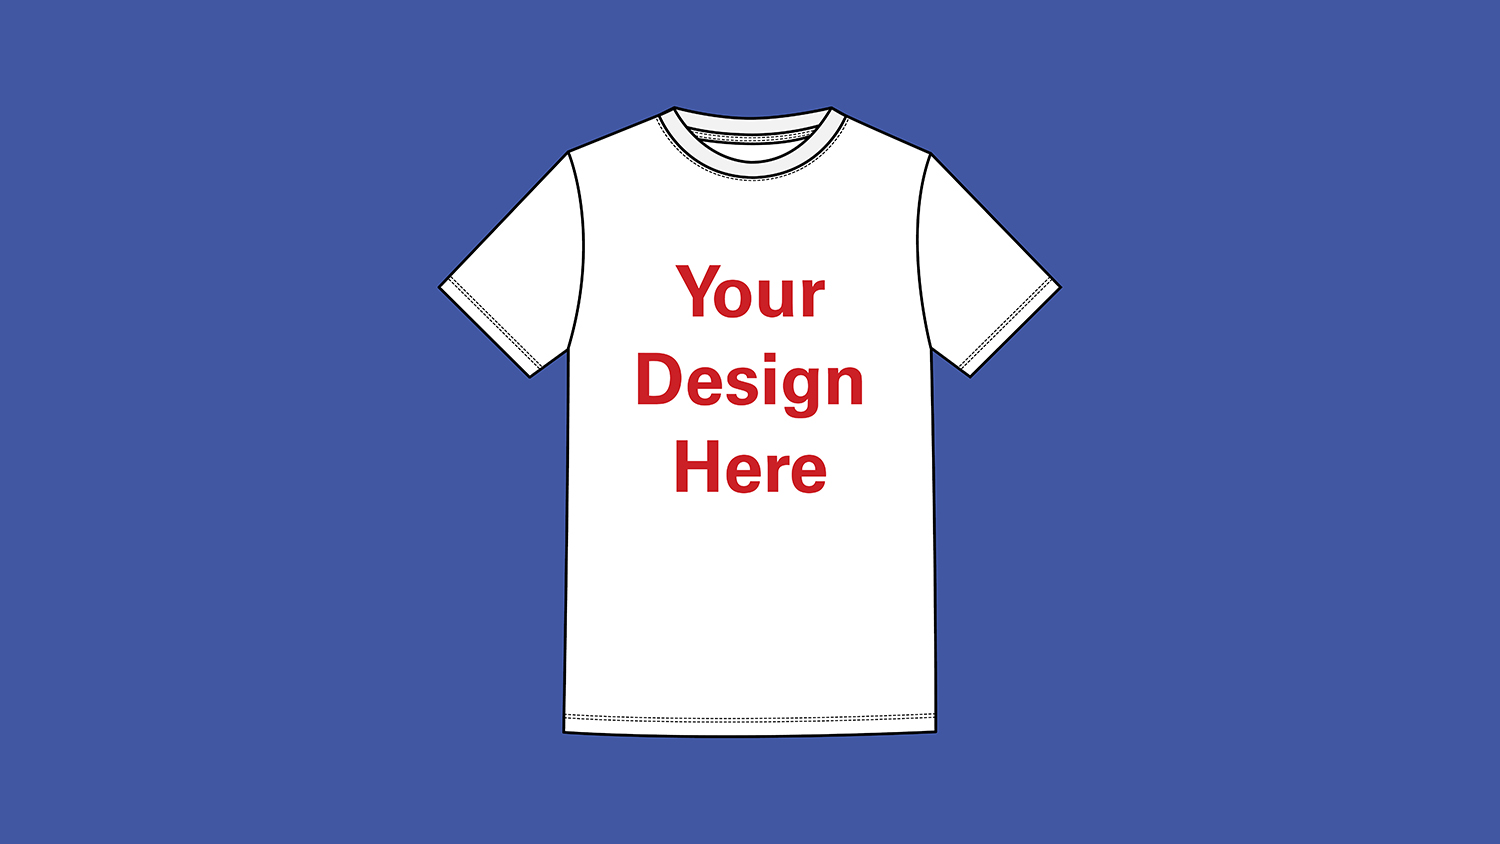 A blank T-shirt, with the words "Your Design Here" across the front